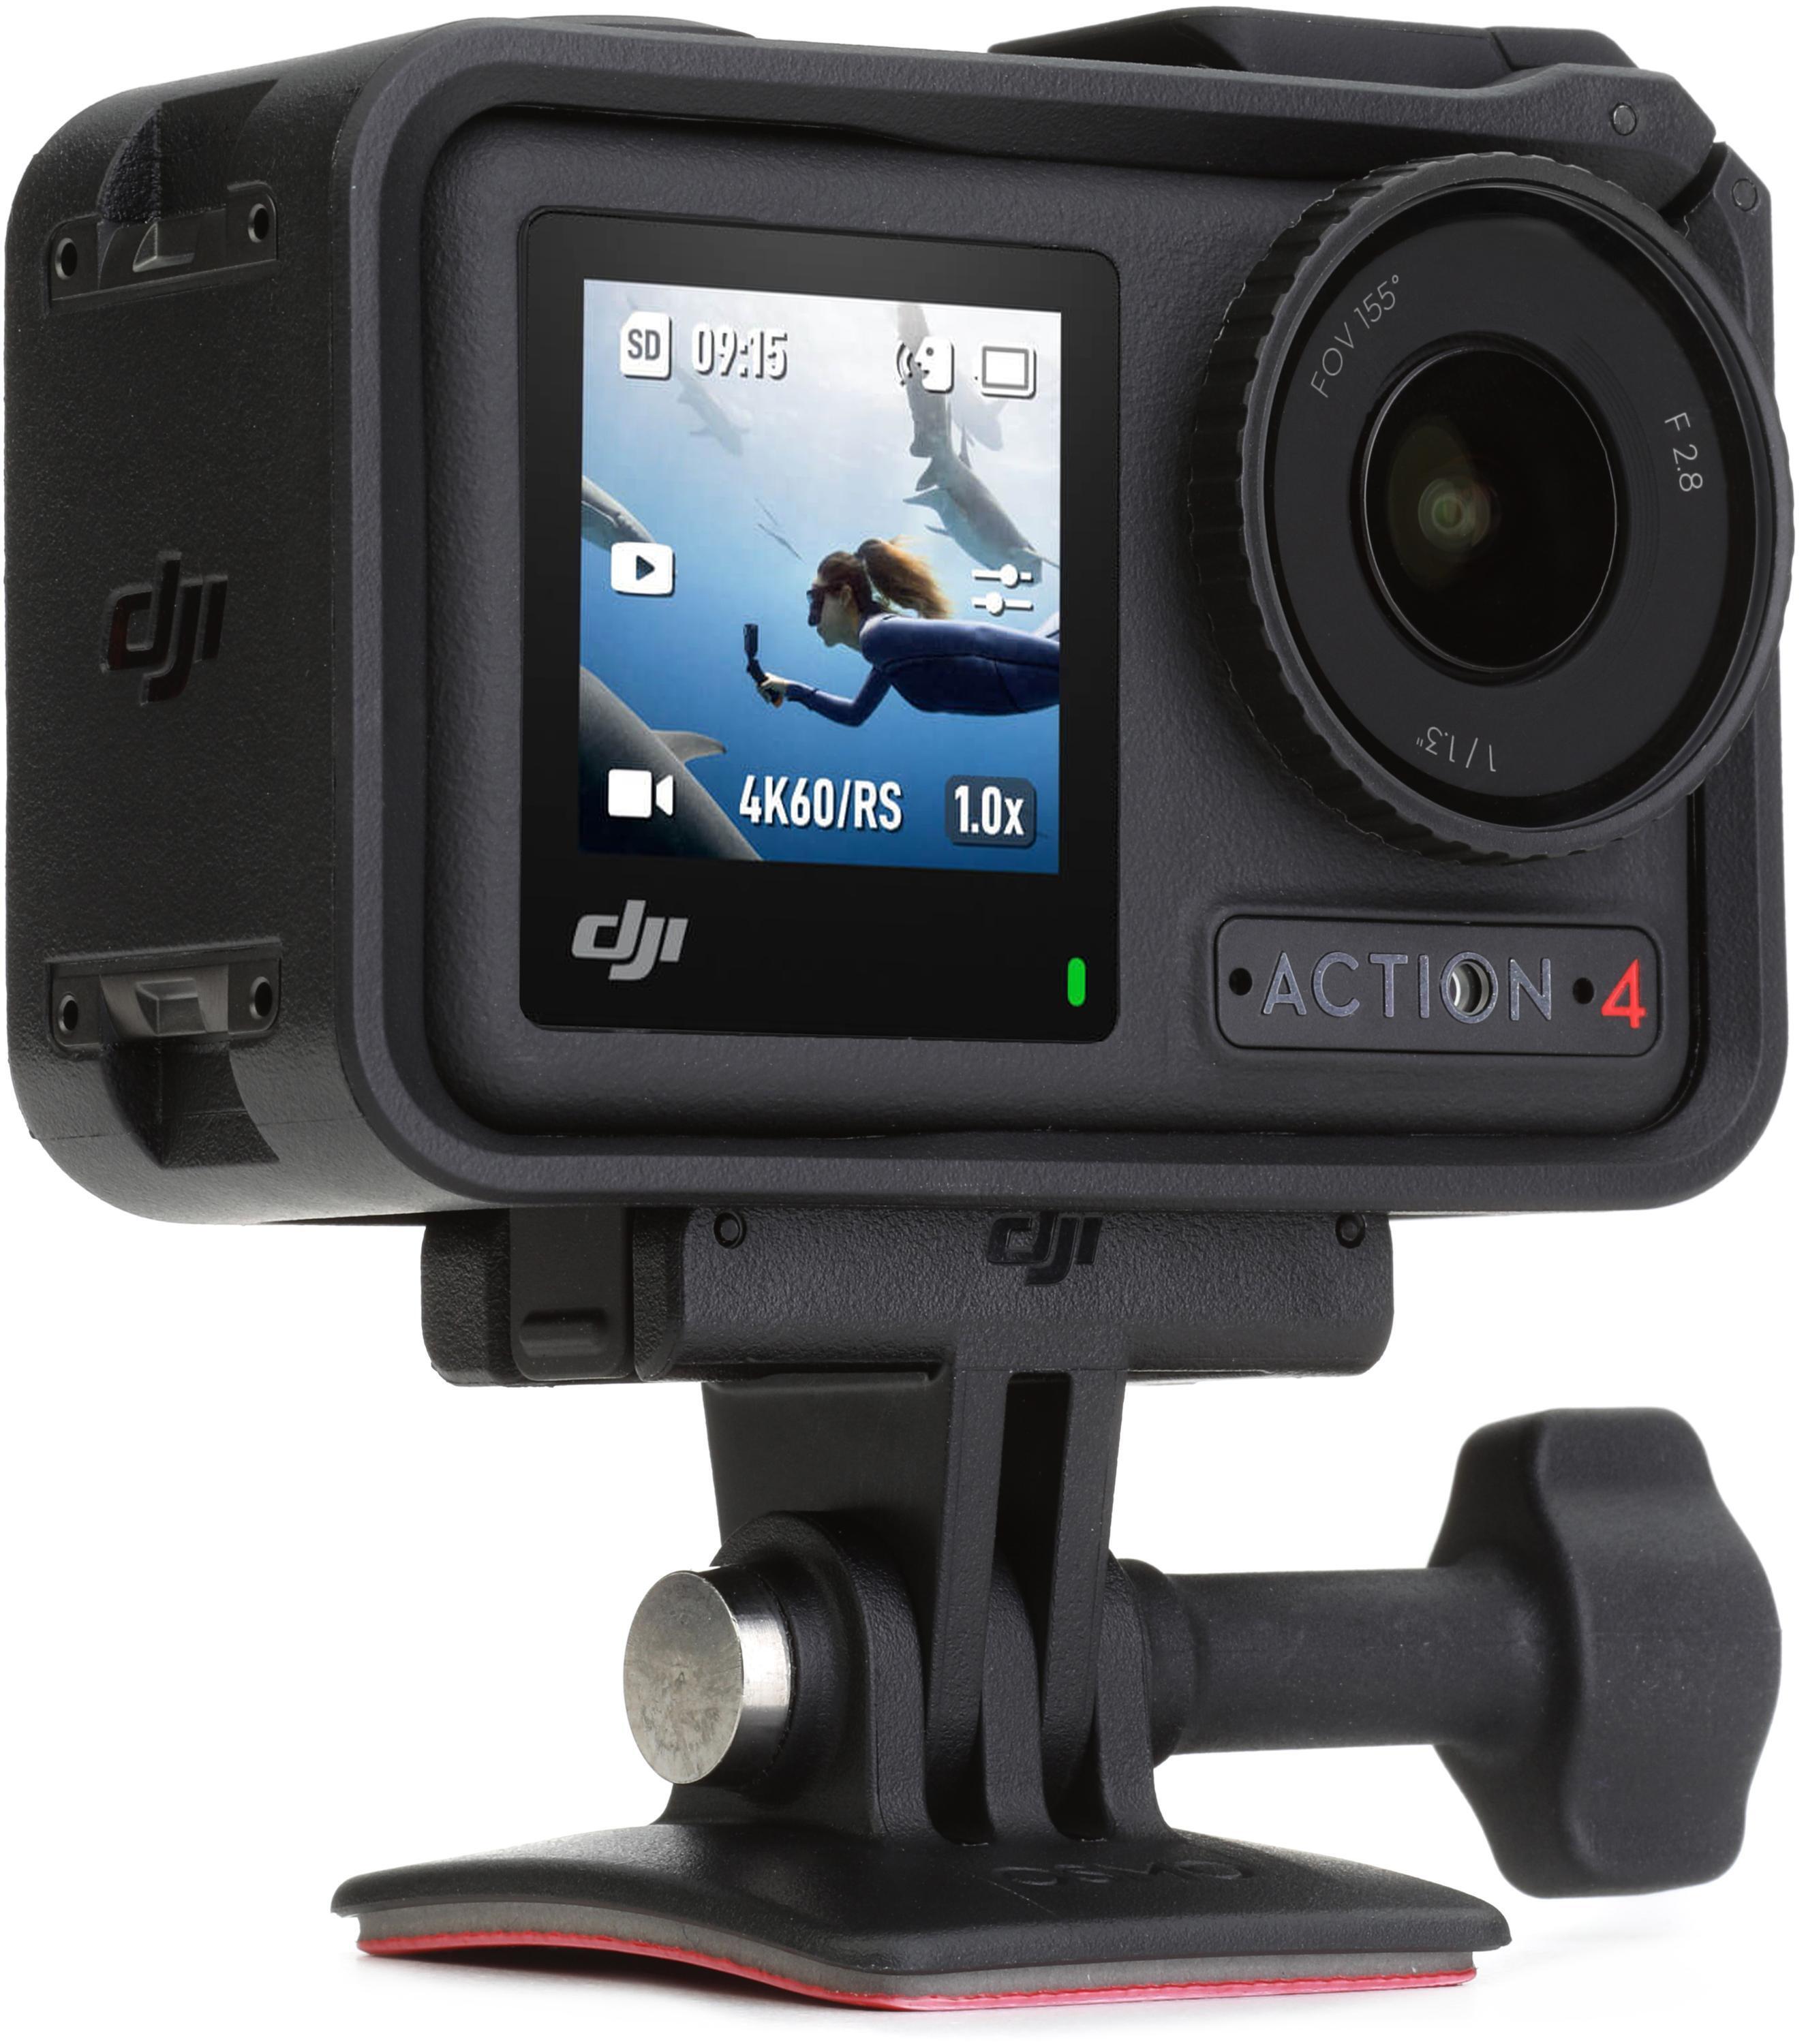 Get $100 Off the DJI Osmo Action 4 Video Camera and Capture Everything -  CNET